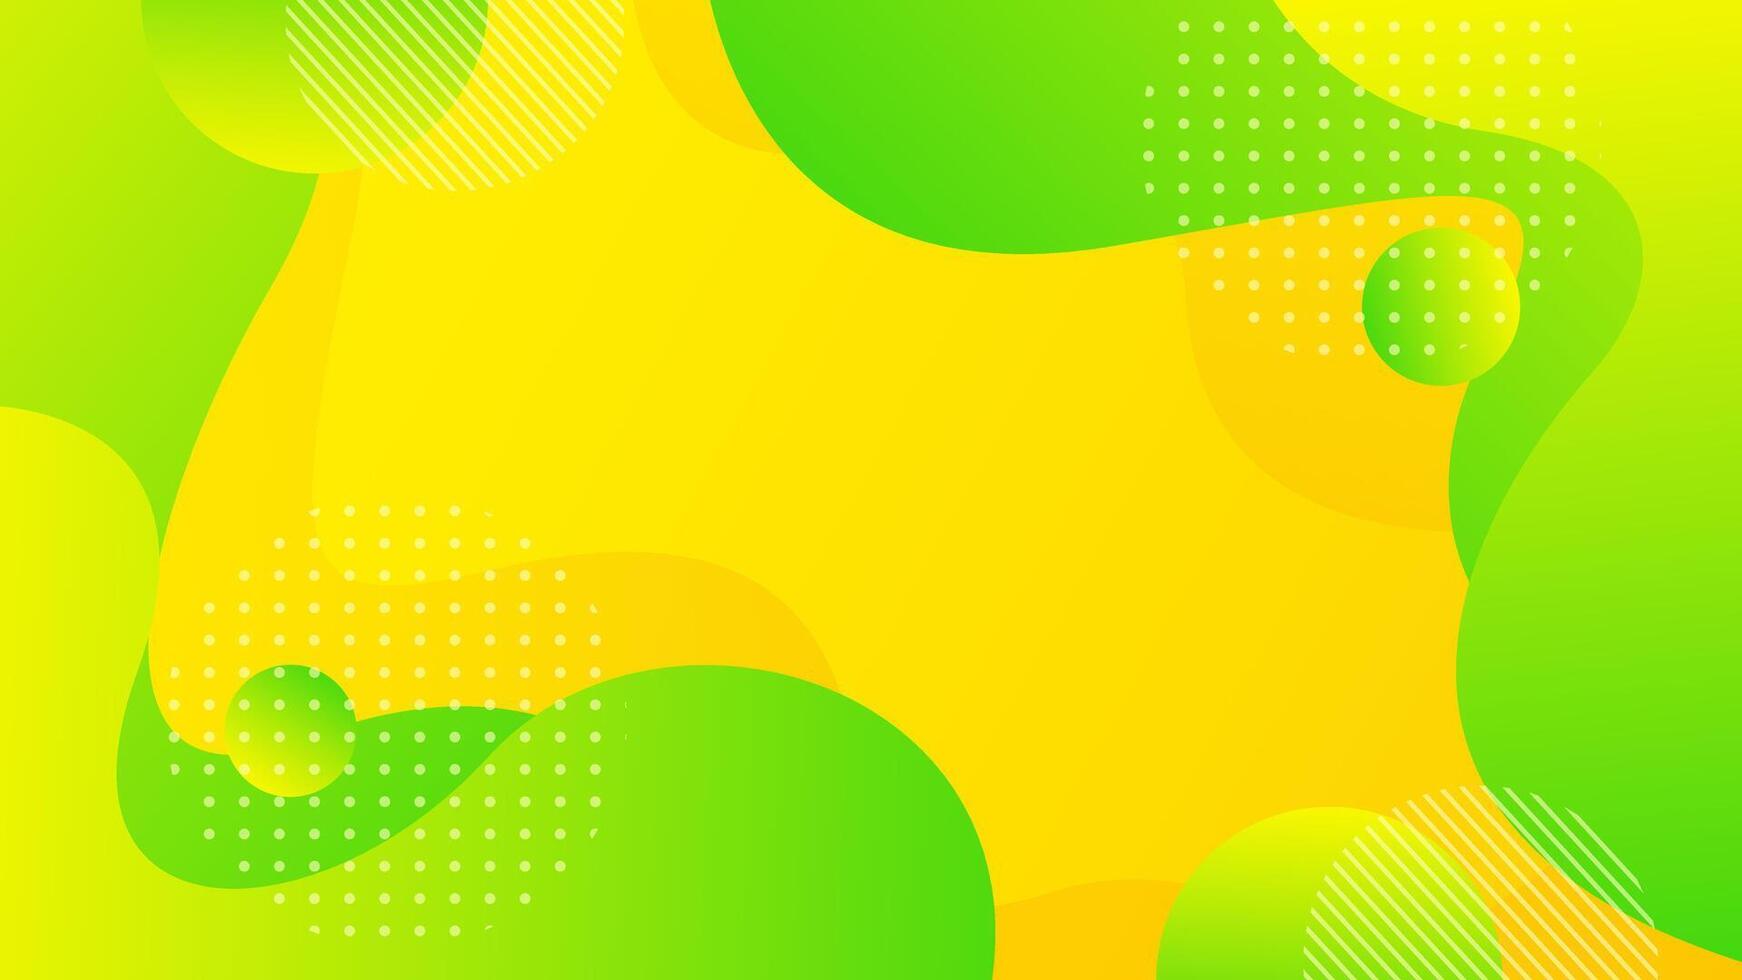 Orange-yellow gradient background design with gradient green liquid wave shapes. Bright abstract wallpaper. Suitable for banners, templates, sales, events, ads, pages, web, and others vector